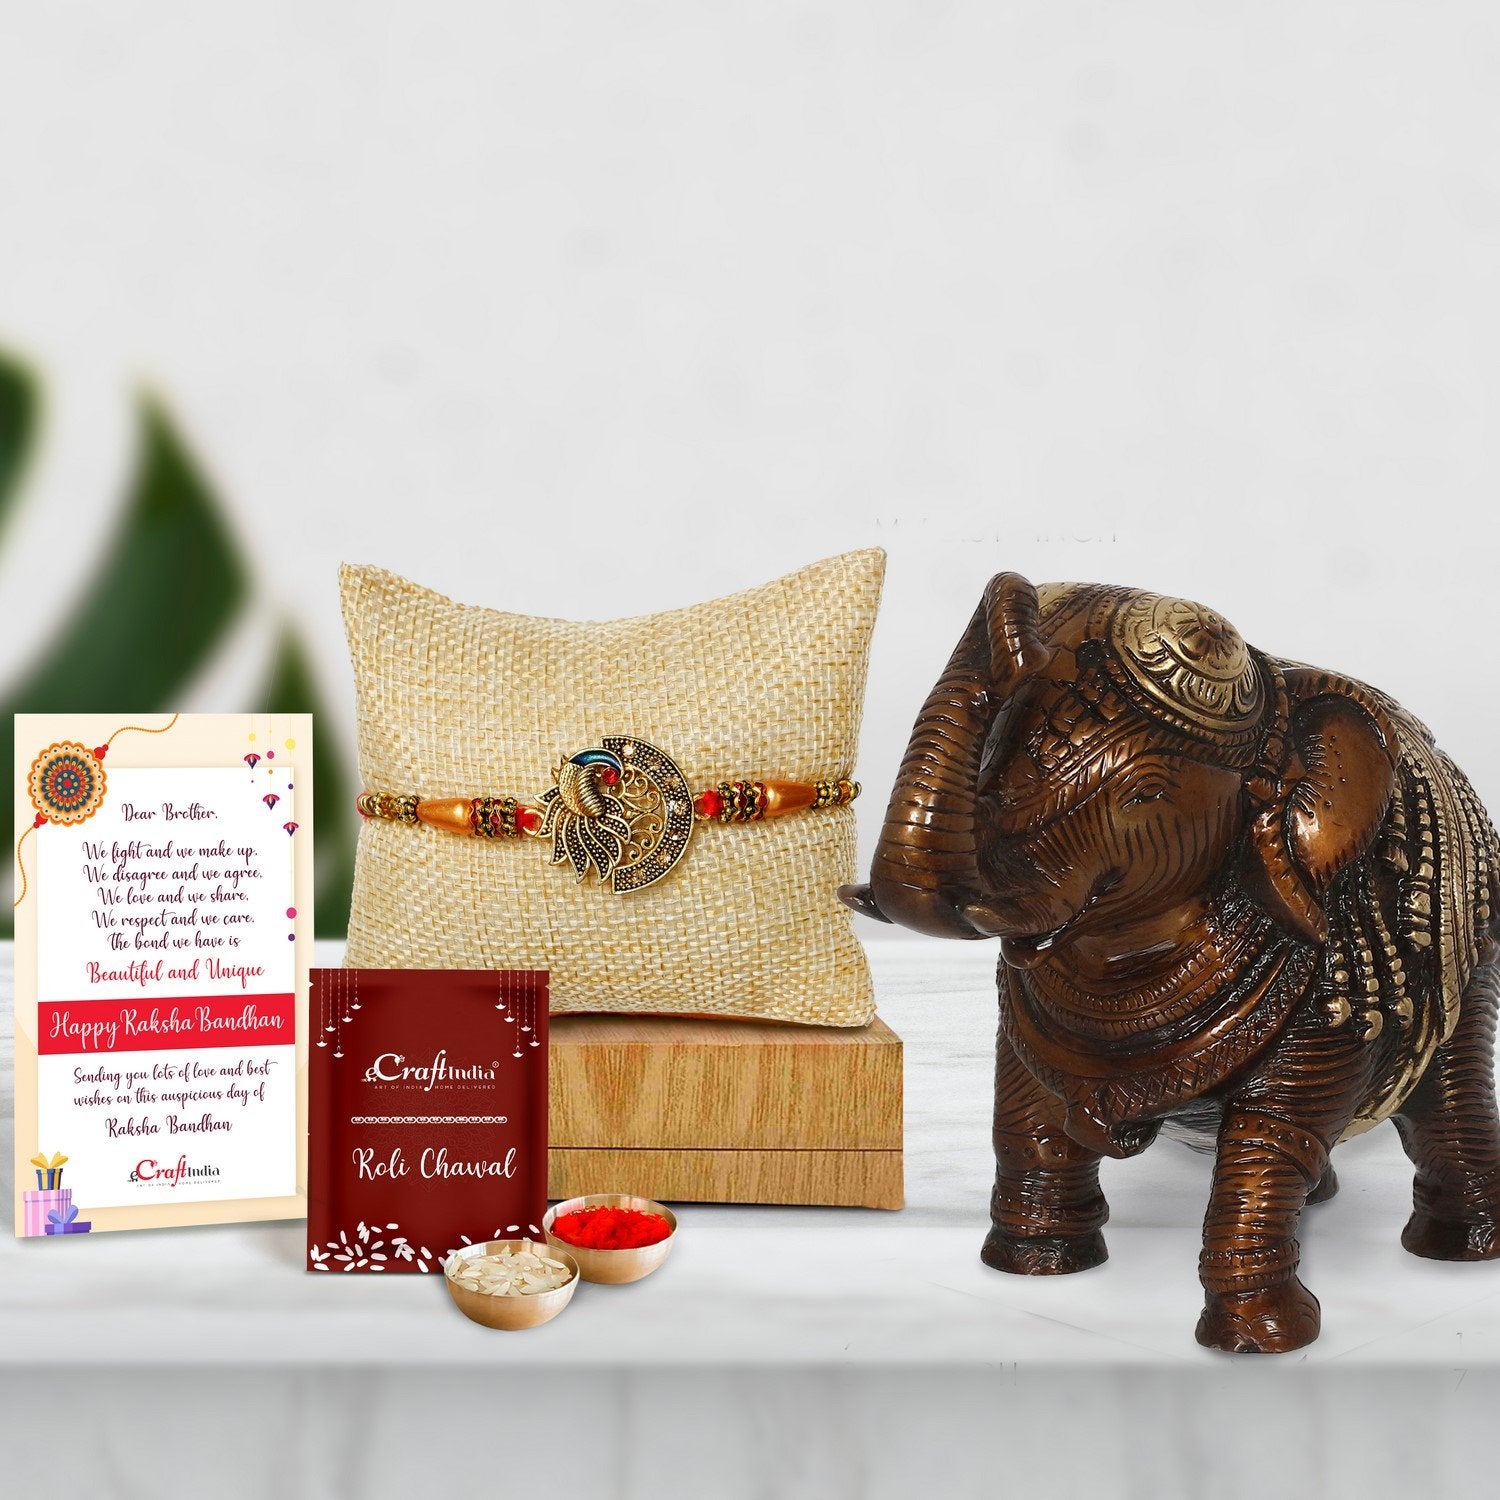 Designer Peacock Rakhi with Antique Finish Decorative Brass Elephant Fingurine and Roli Chawal Pack, Best Wishes Greeting Card